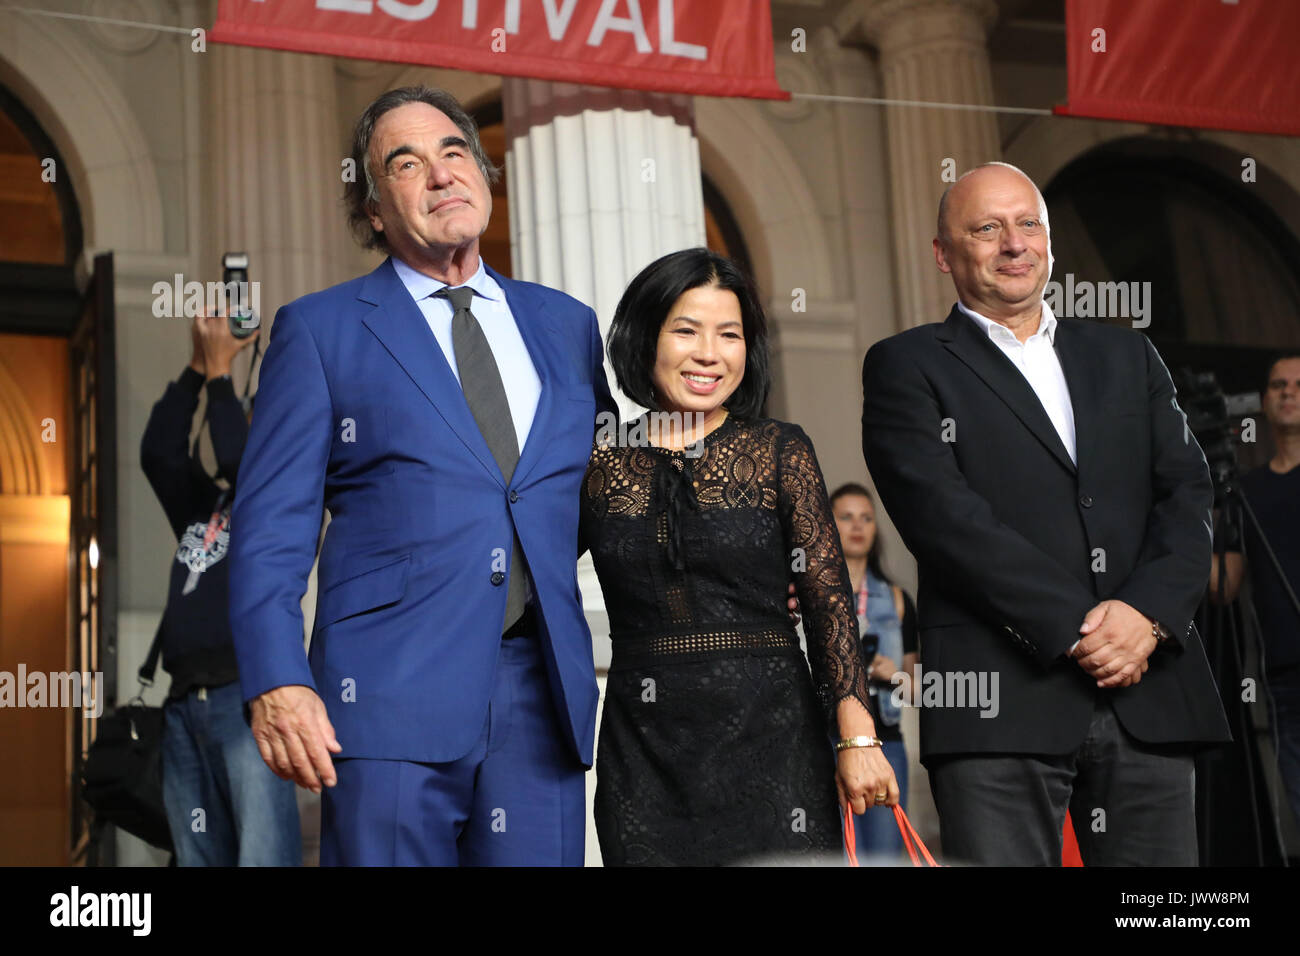 Sarajevo, Bosnia and Herzegovina. 13th Aug, 2017. Famous U.S. film director Oliver Stone (L) and the festival director Mirsad Purivatra (R) pose for a photo on the red carpet during the 23rd Sarajevo Film Festival(SFF) in Sarajevo, Bosnia and Herzegovina, on Aug. 13, 2017. Oliver Stone received Honorary Heart of Sarajevo on the festival for his remarkable contribution to the art of film. Credit: Haris Memija/Xinhua/Alamy Live News Stock Photo